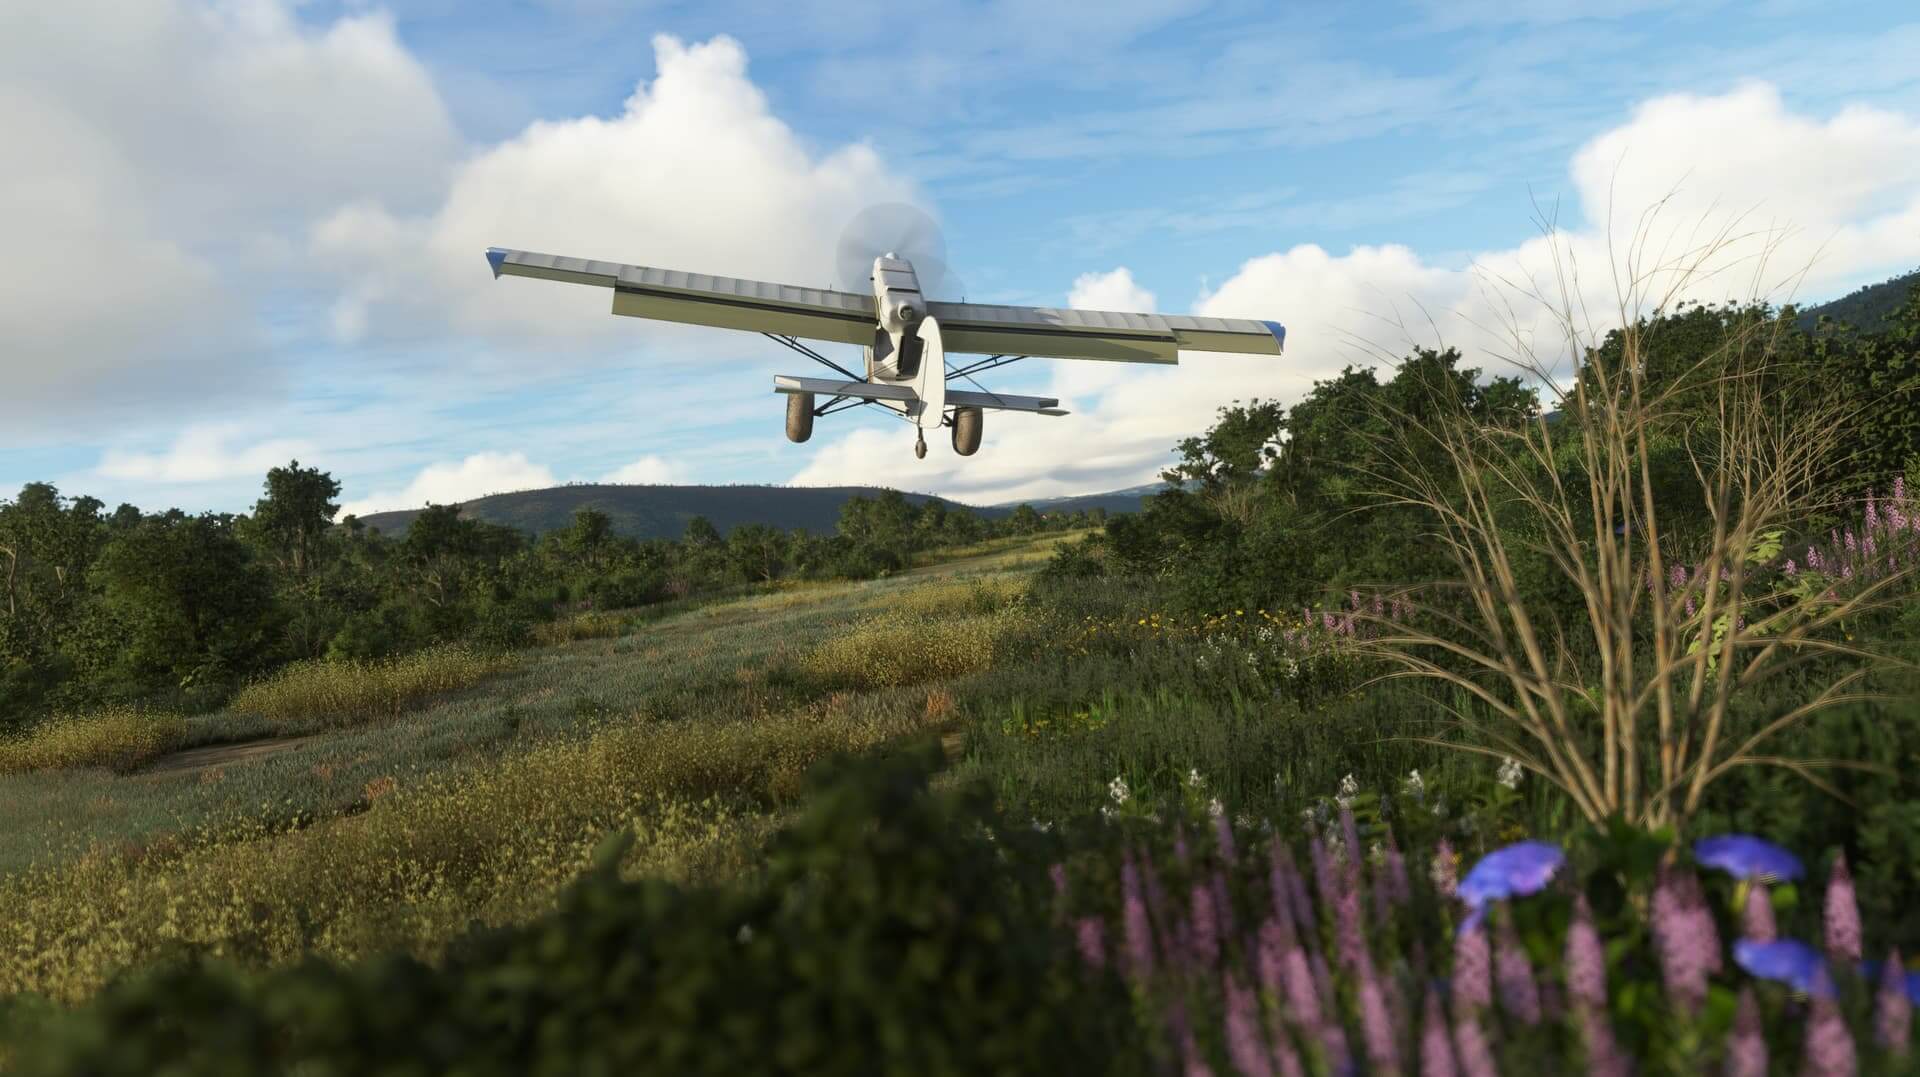 A propeller aircraft with flaps deployed passes close to shrubbery as it raises the nose in a high angle of attack manoeuvre.